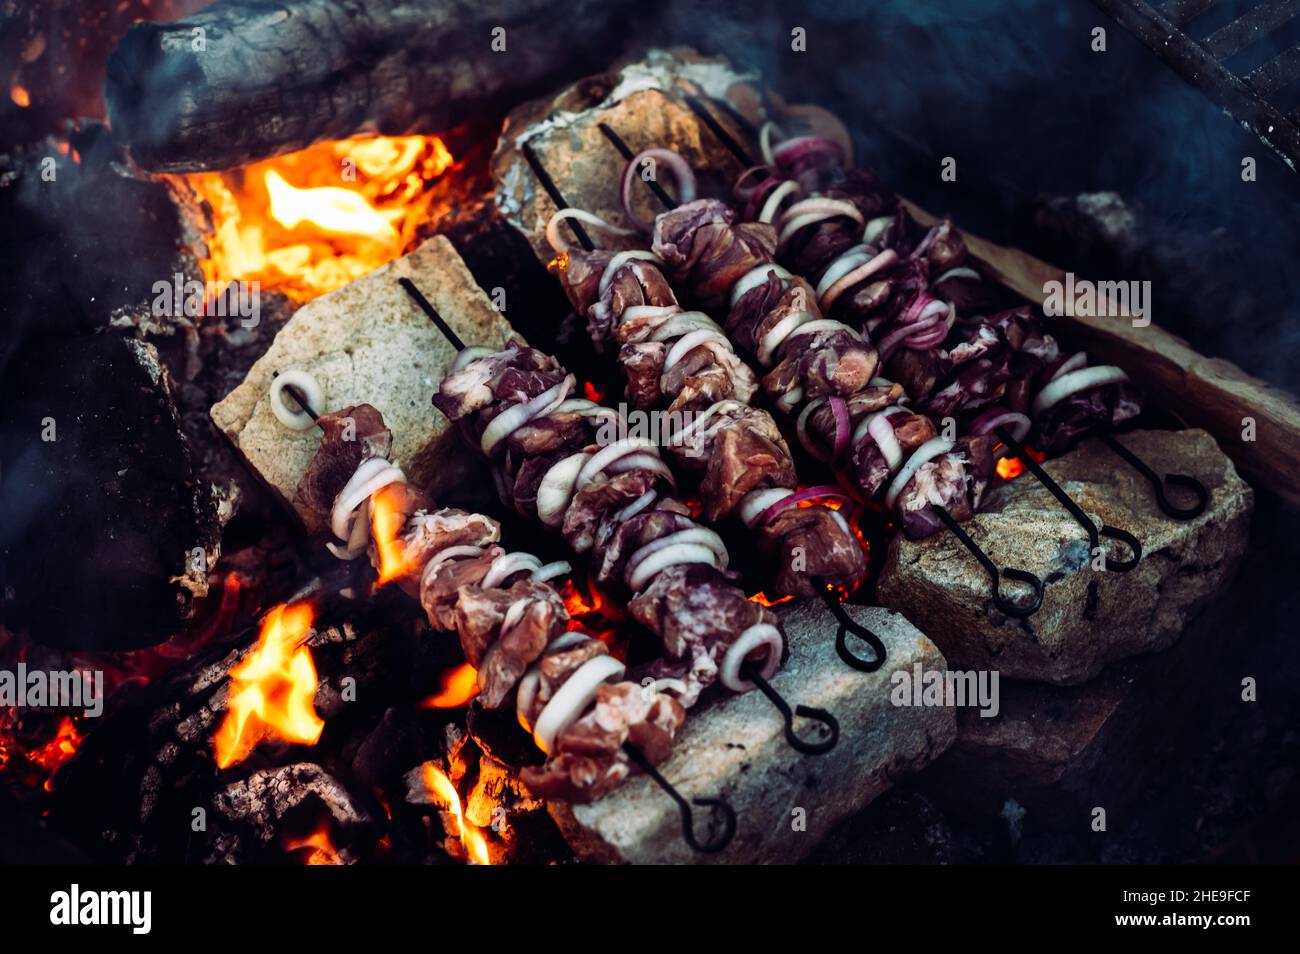 Barbecue prepared over the fire on charcoals Stock Photo